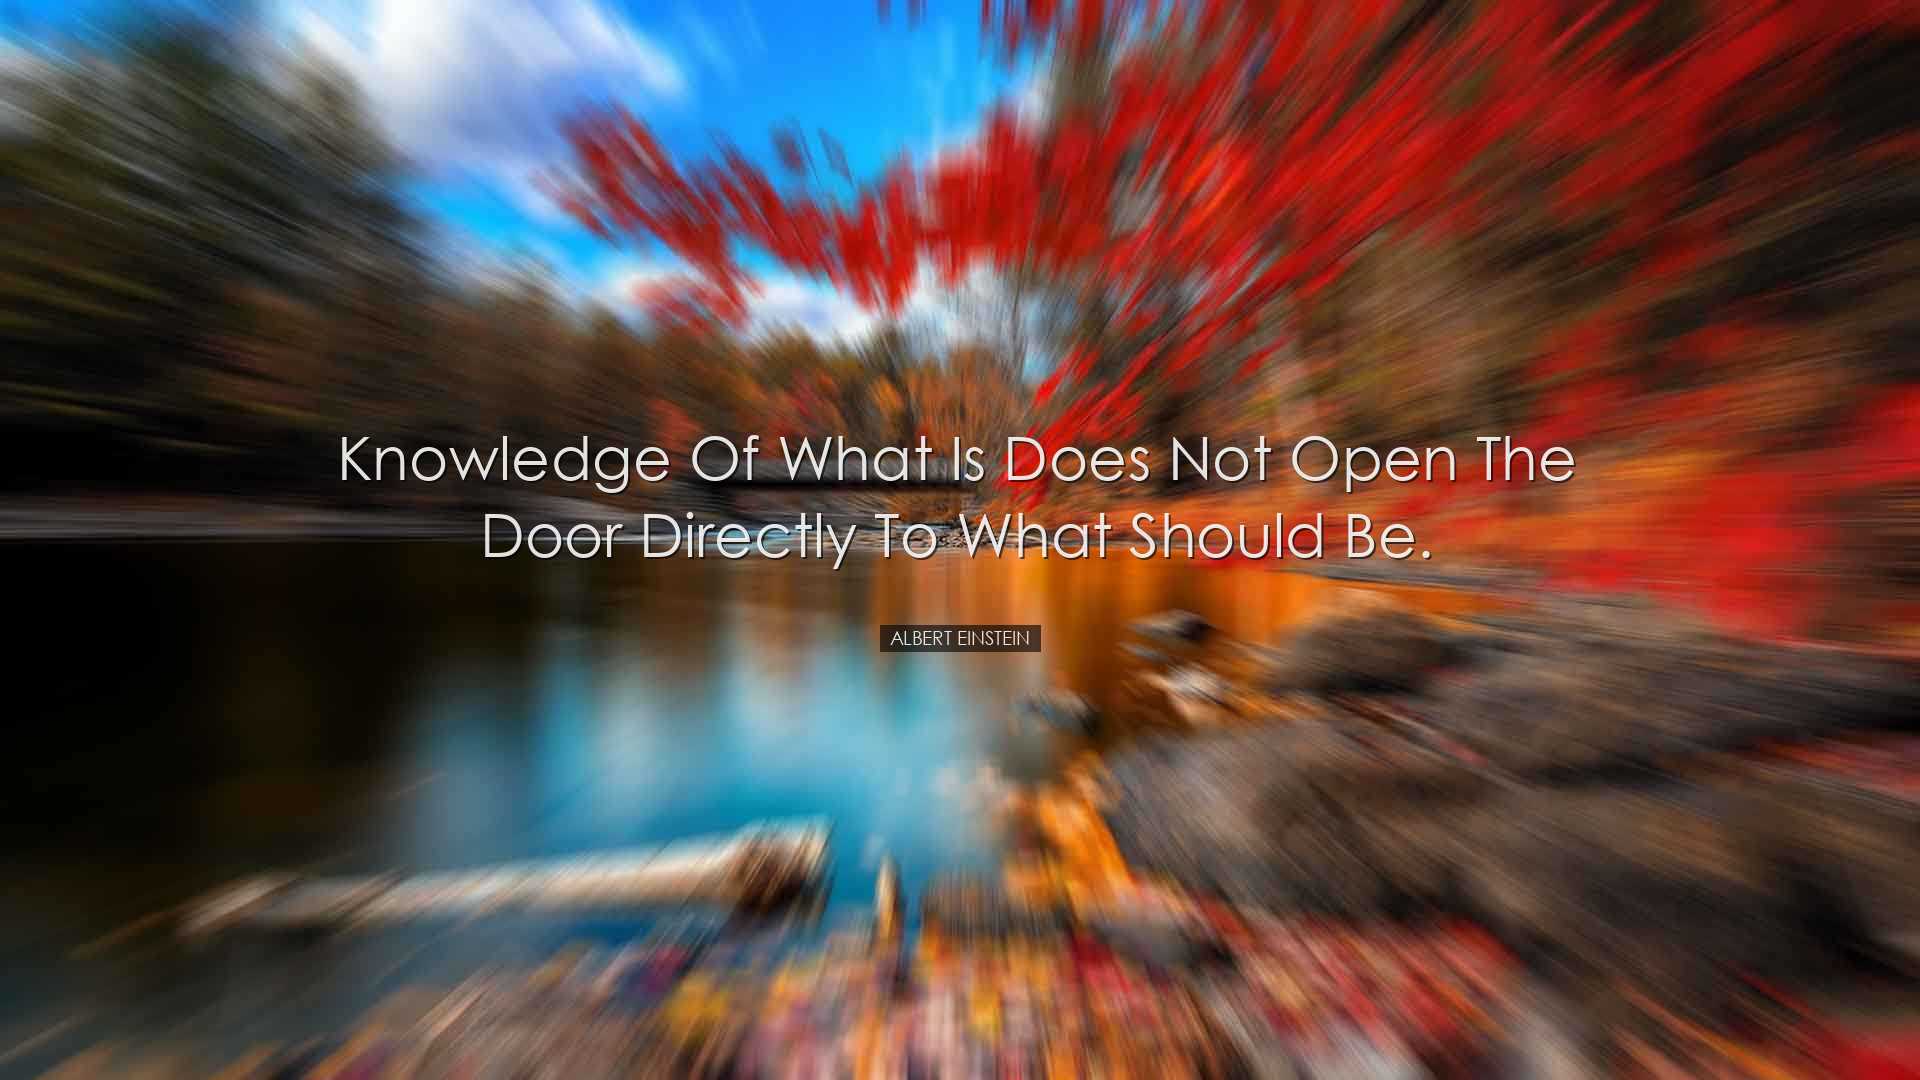 Knowledge of what is does not open the door directly to what shoul